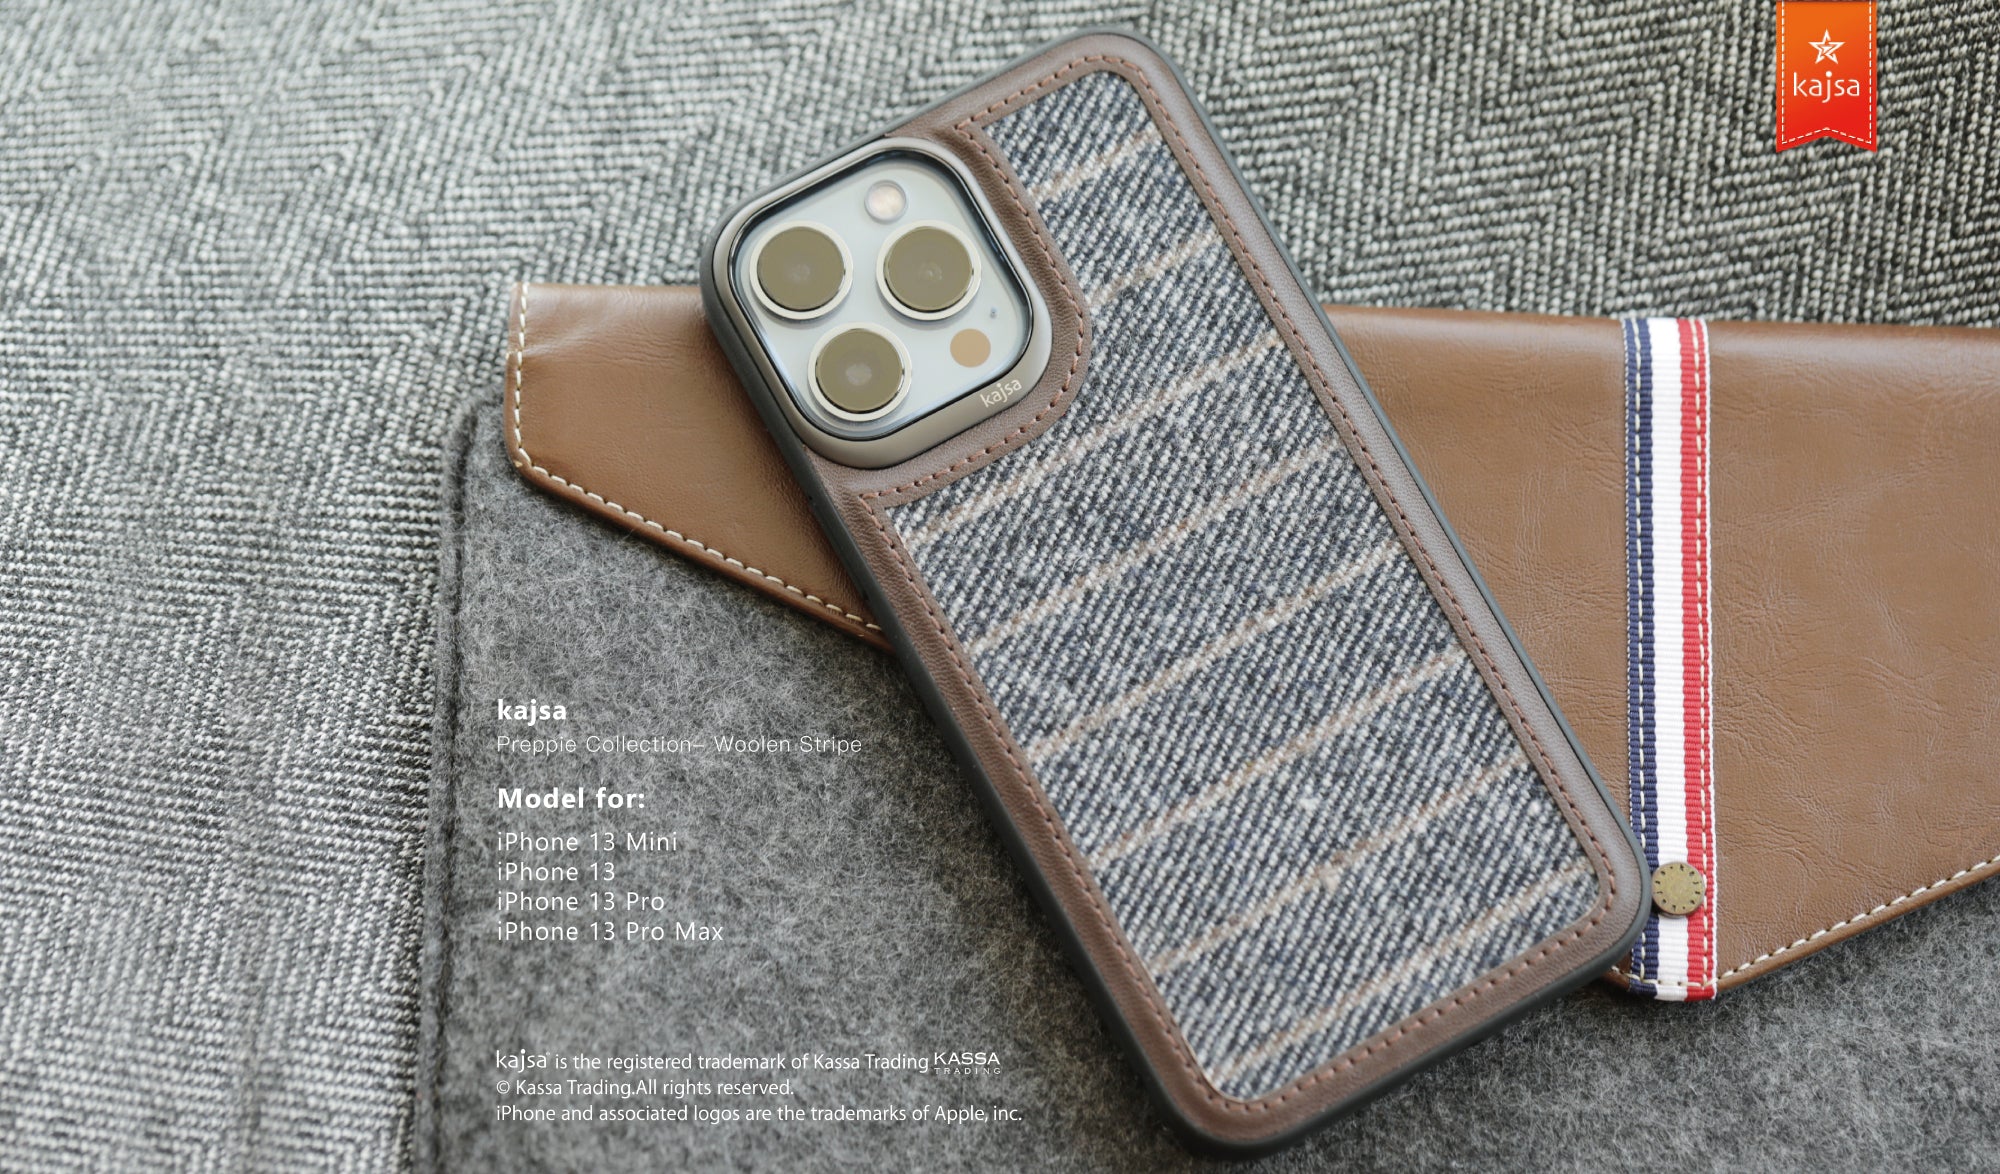 Preppie Collection - Woolen Stripe Back Case for iPhone 13-Phone Case- phone case - phone cases- phone cover- iphone cover- iphone case- iphone cases- leather case- leather cases- DIYCASE - custom case - leather cover - hand strap case - croco pattern case - snake pattern case - carbon fiber phone case - phone case brand - unique phone case - high quality - phone case brand - protective case - buy phone case hong kong - online buy phone case - iphone‎手機殼 - 客製化手機殼 - samsung ‎手機殼 - 香港手機殼 - 買電話殼